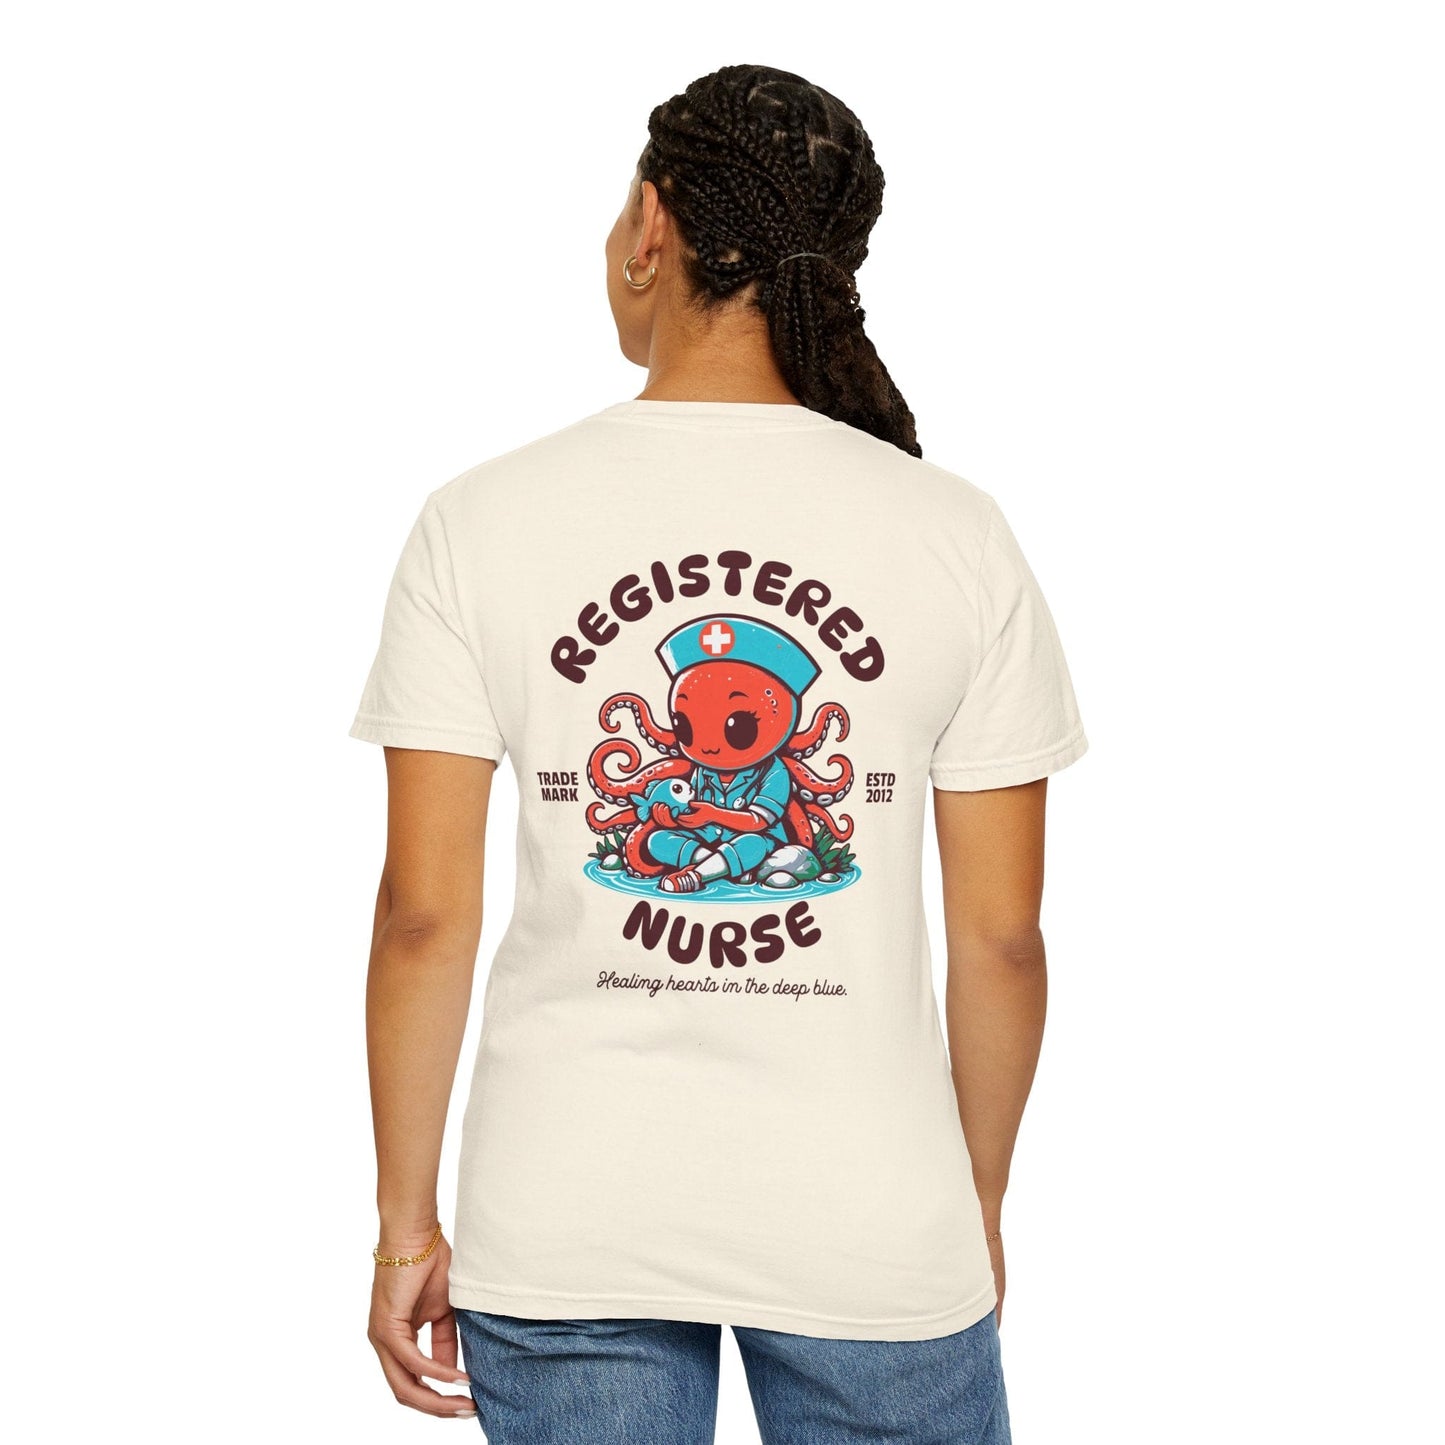 Funny Registered Nurse Octopus Graphic Shirt Women with Back Print - Ivory/Graphite, Gift for RN Nurse Week